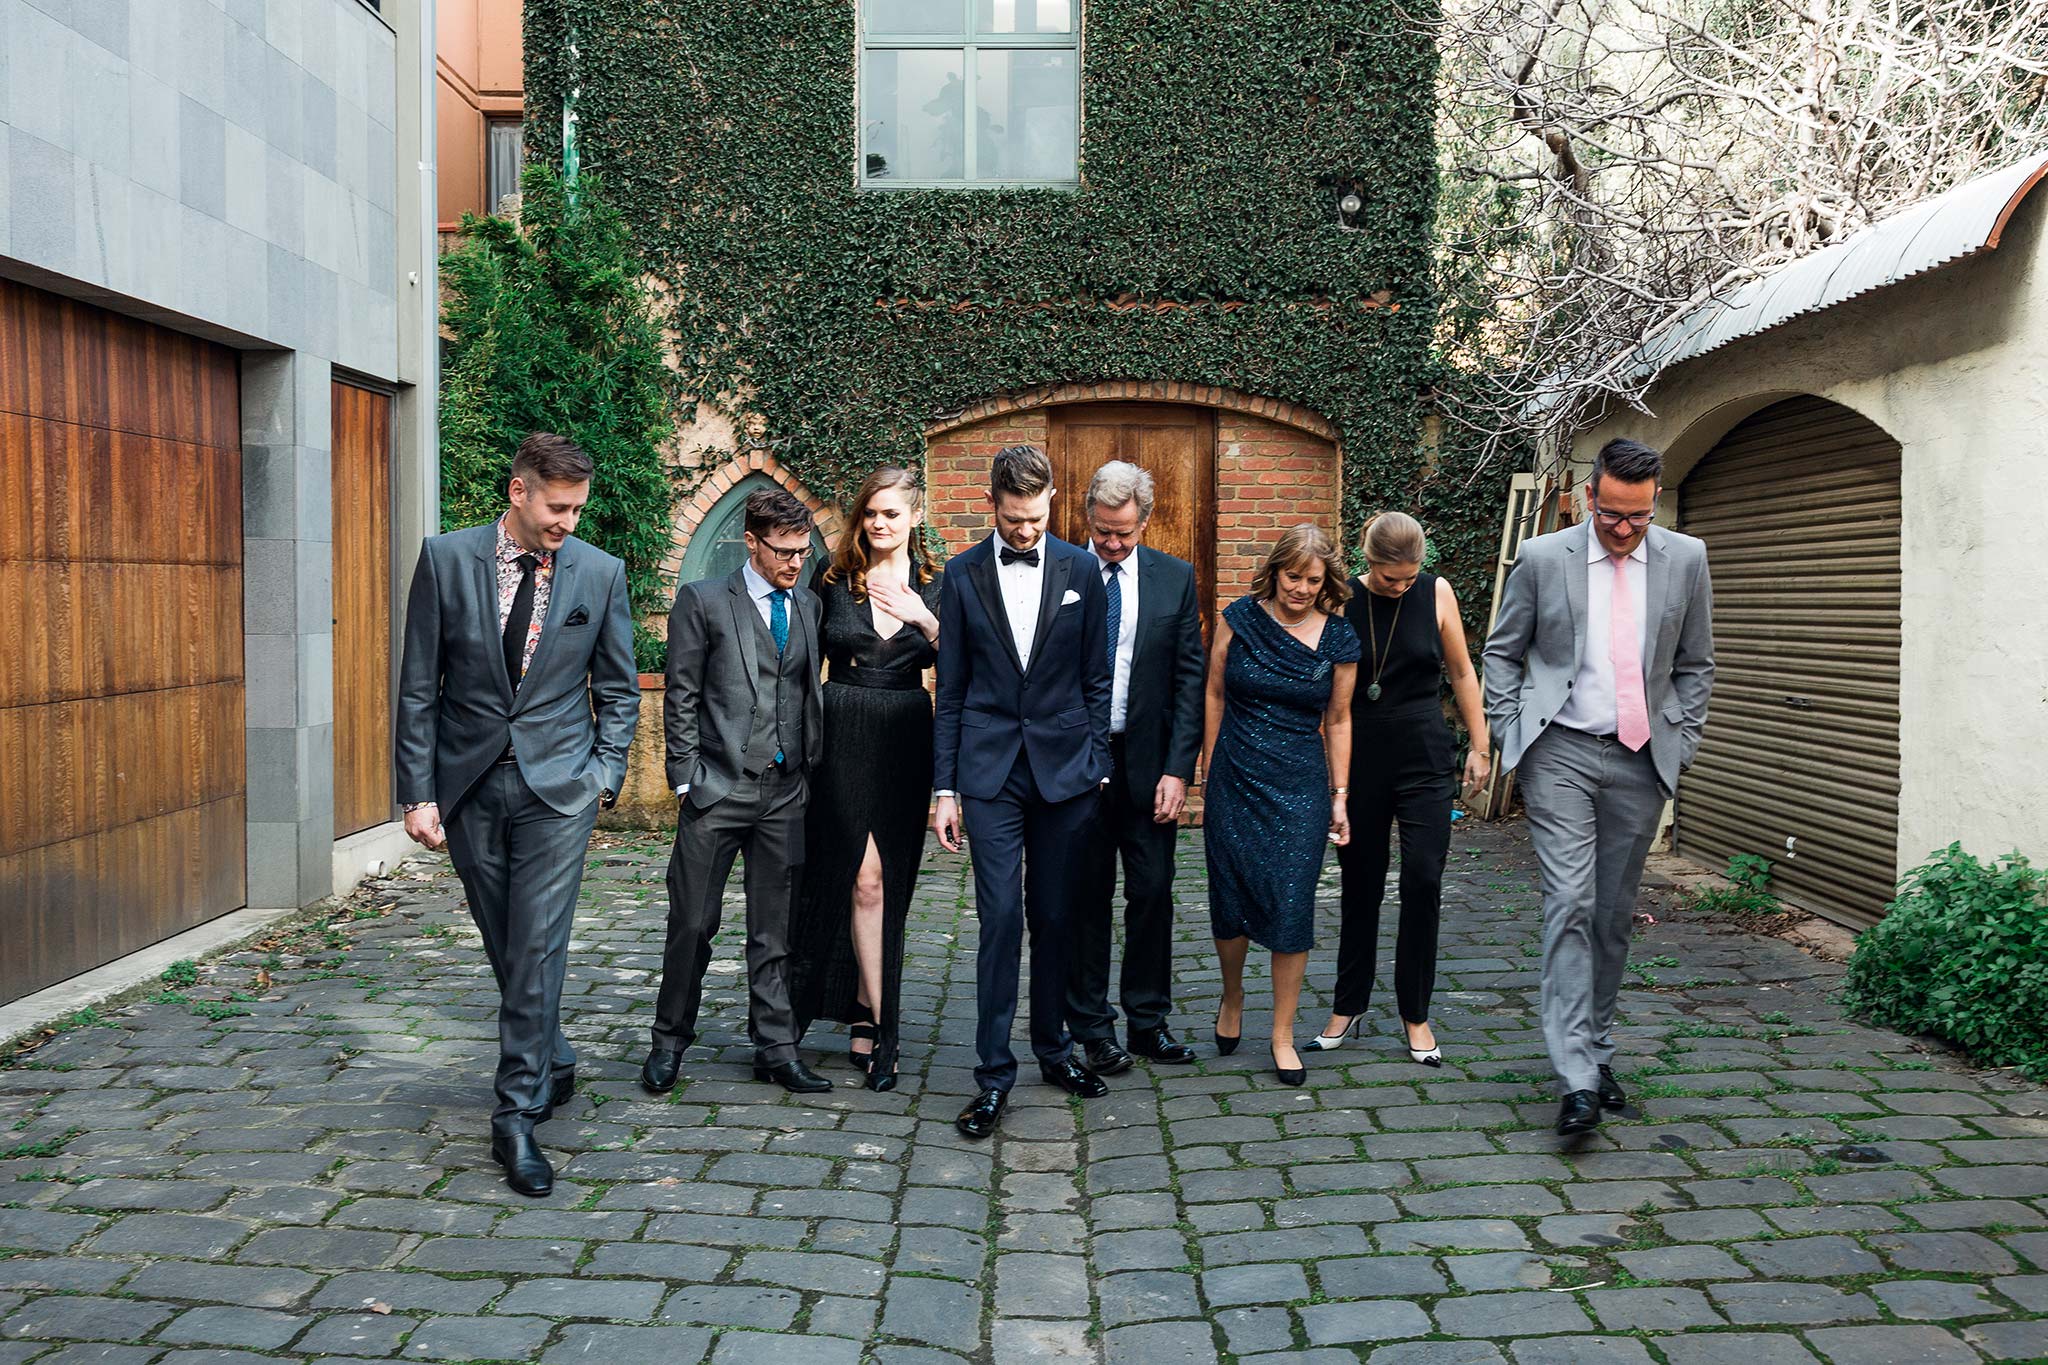 melbourne-fitzroy-st-andrews-conservatory-pumphouse-wedding-groom-family-group